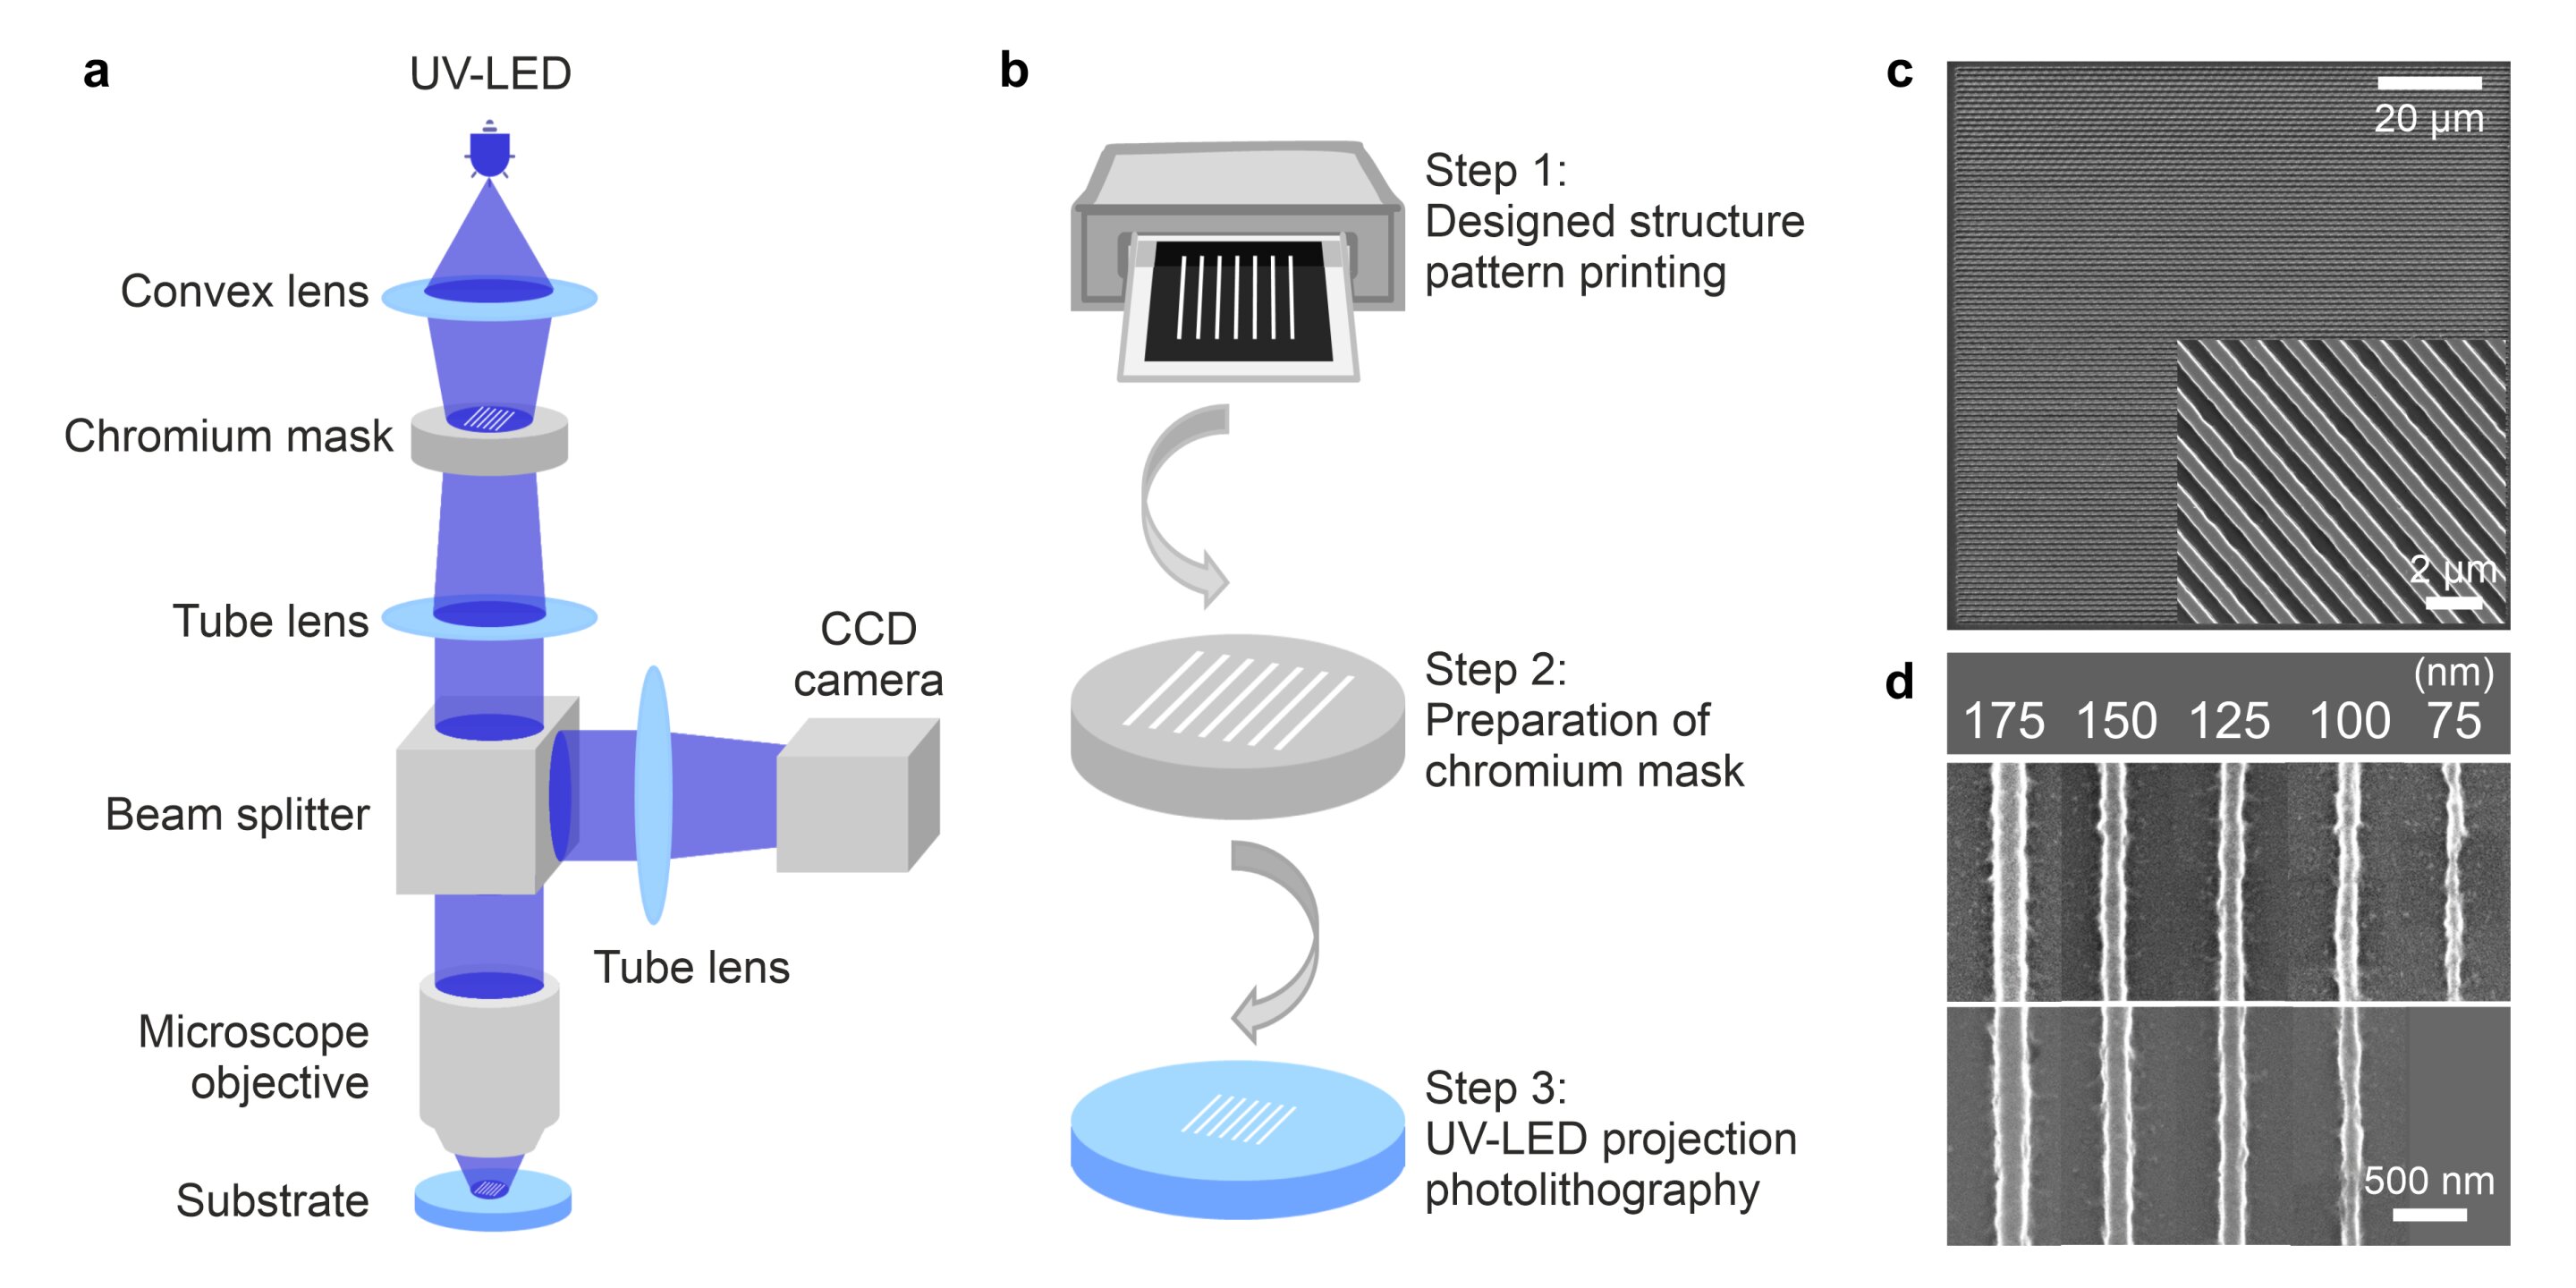 A low-cost microscope projection photolithography system for high-resolution fabrication